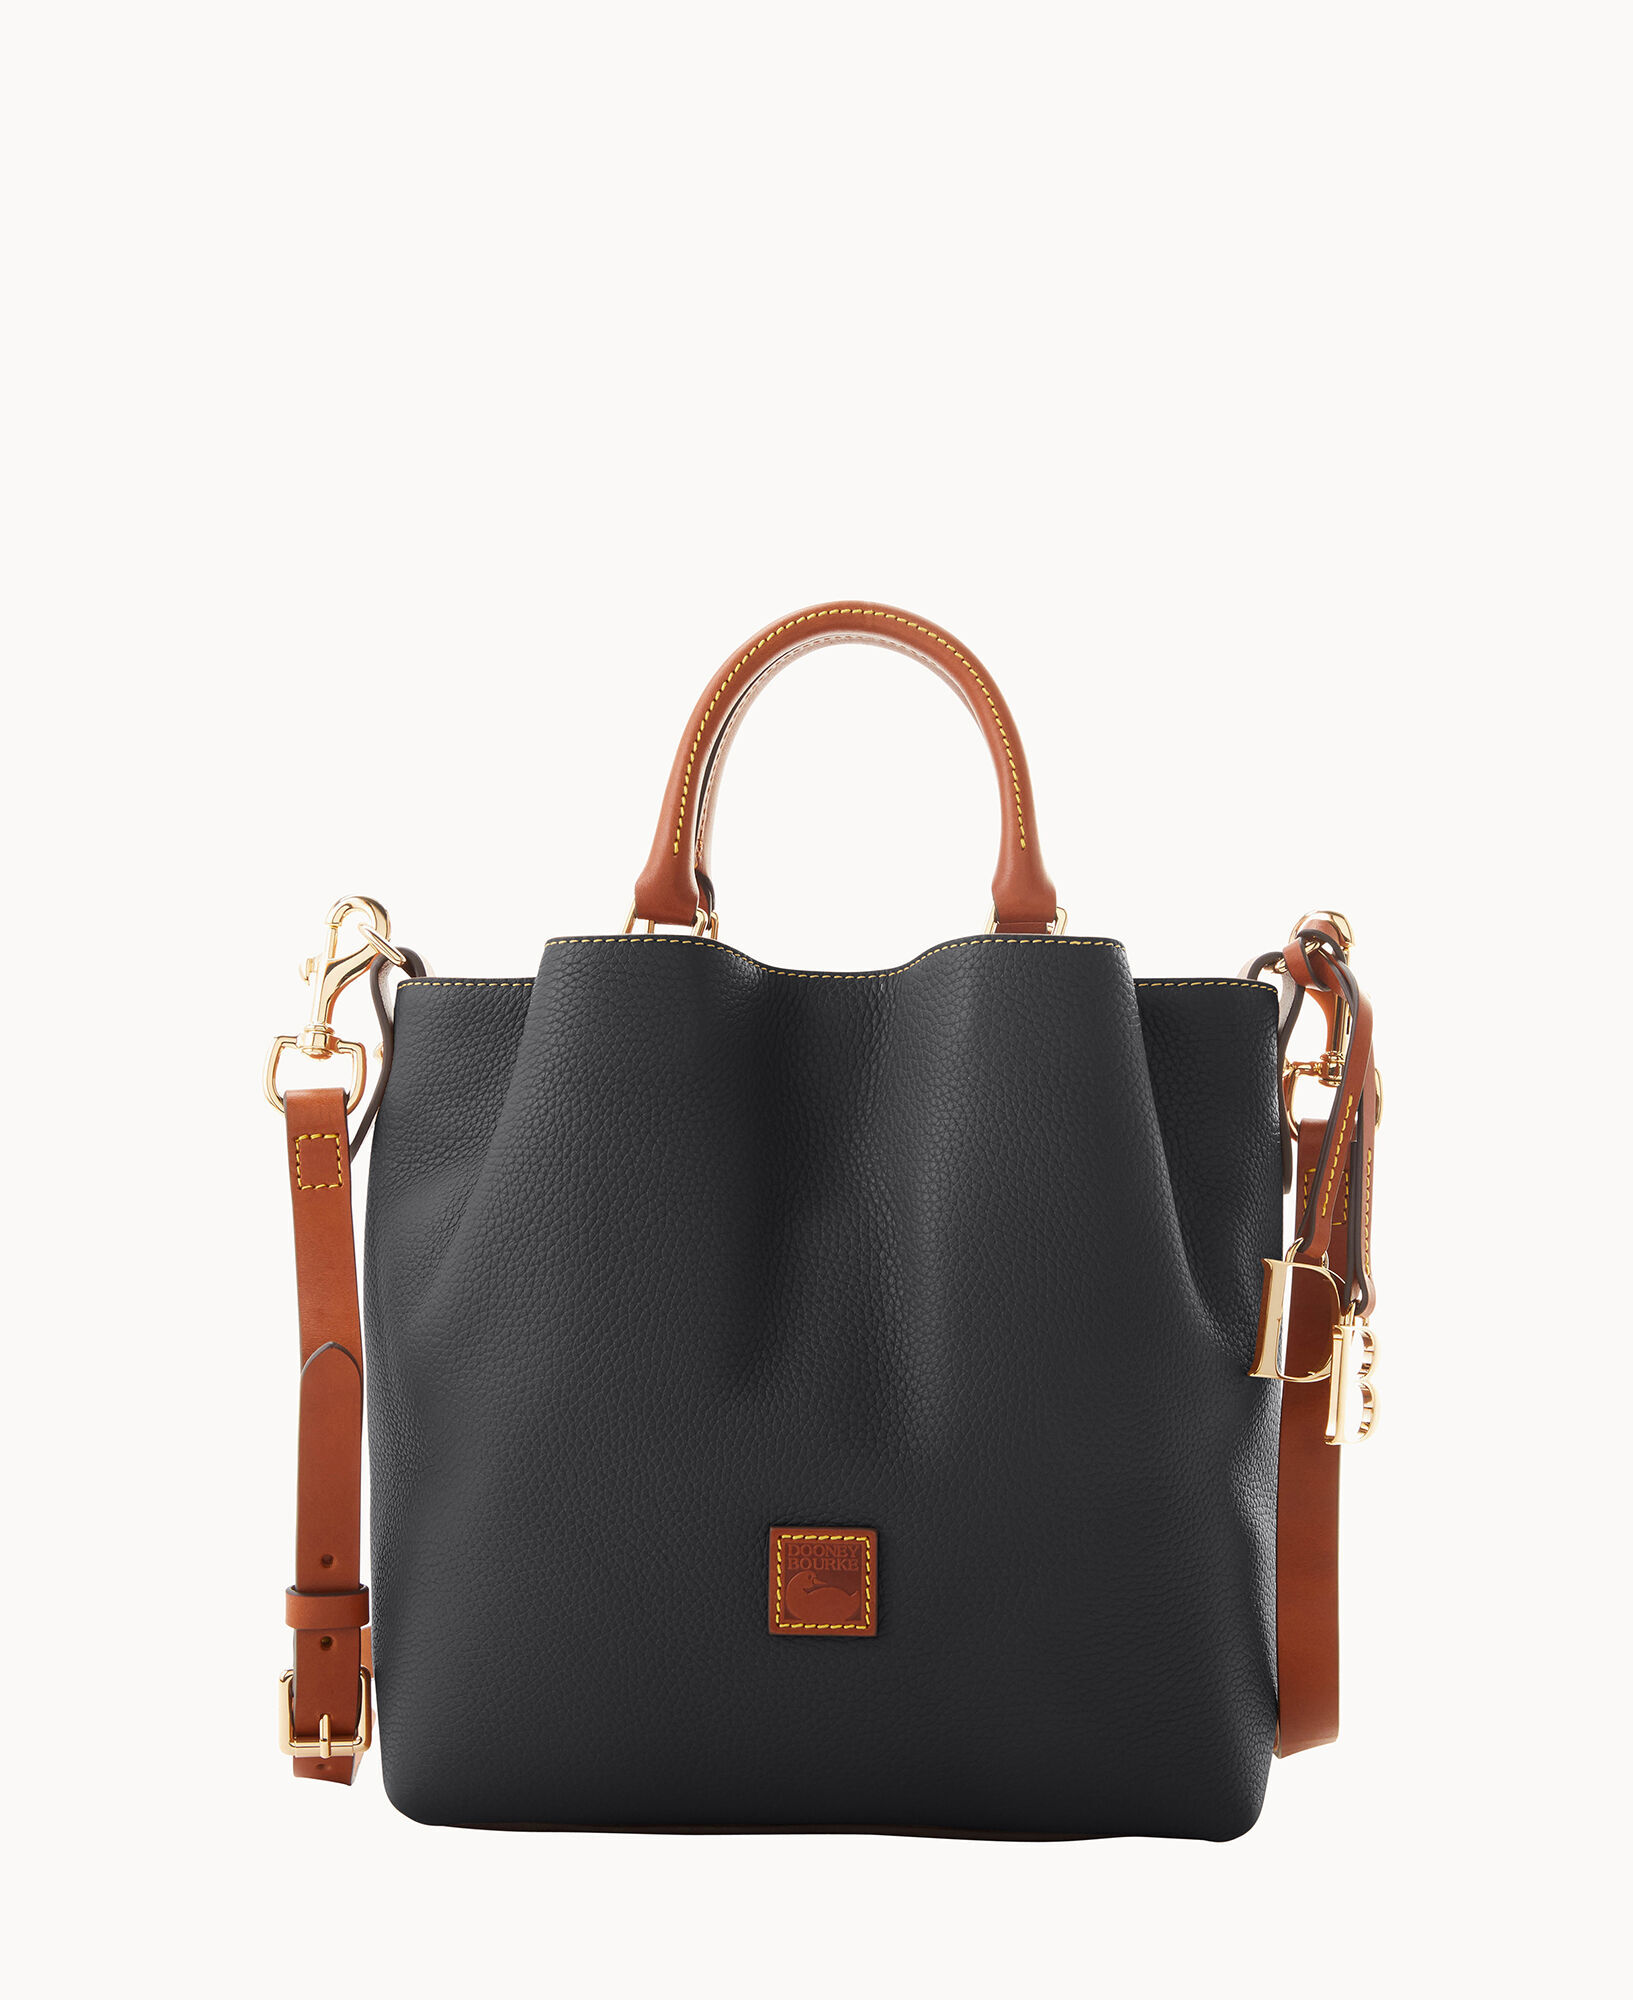 Dooney & Bourke Small Pebble Leather Tote